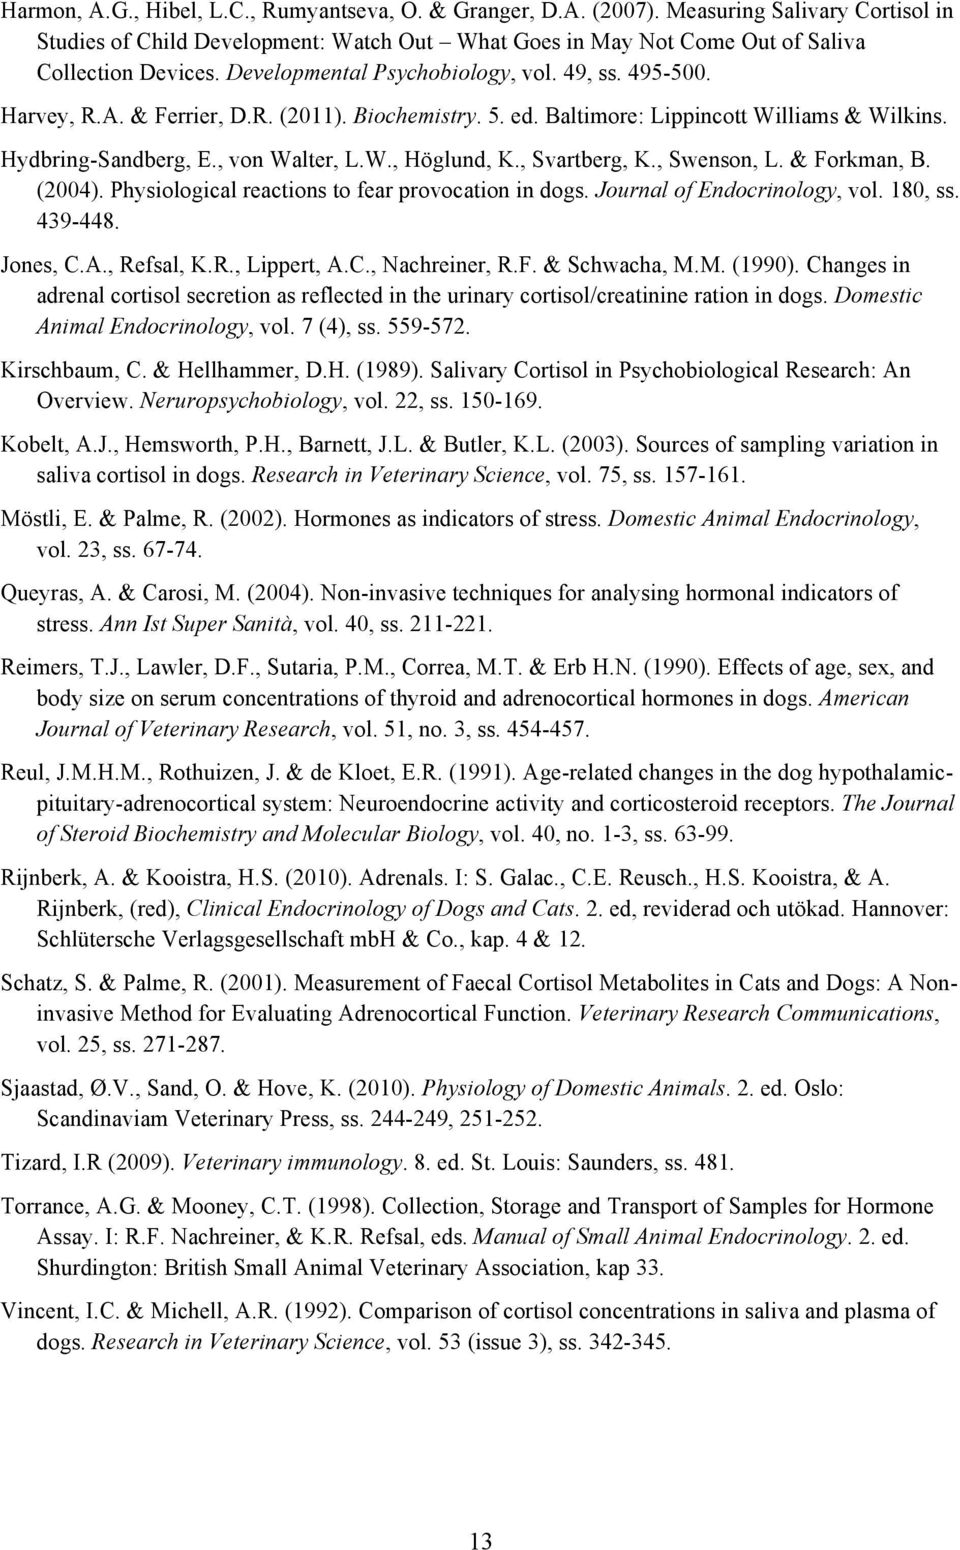 , Svartberg, K., Swenson, L. & Forkman, B. (2004). Physiological reactions to fear provocation in dogs. Journal of Endocrinology, vol. 180, ss. 439-448. Jones, C.A., Refsal, K.R., Lippert, A.C., Nachreiner, R.